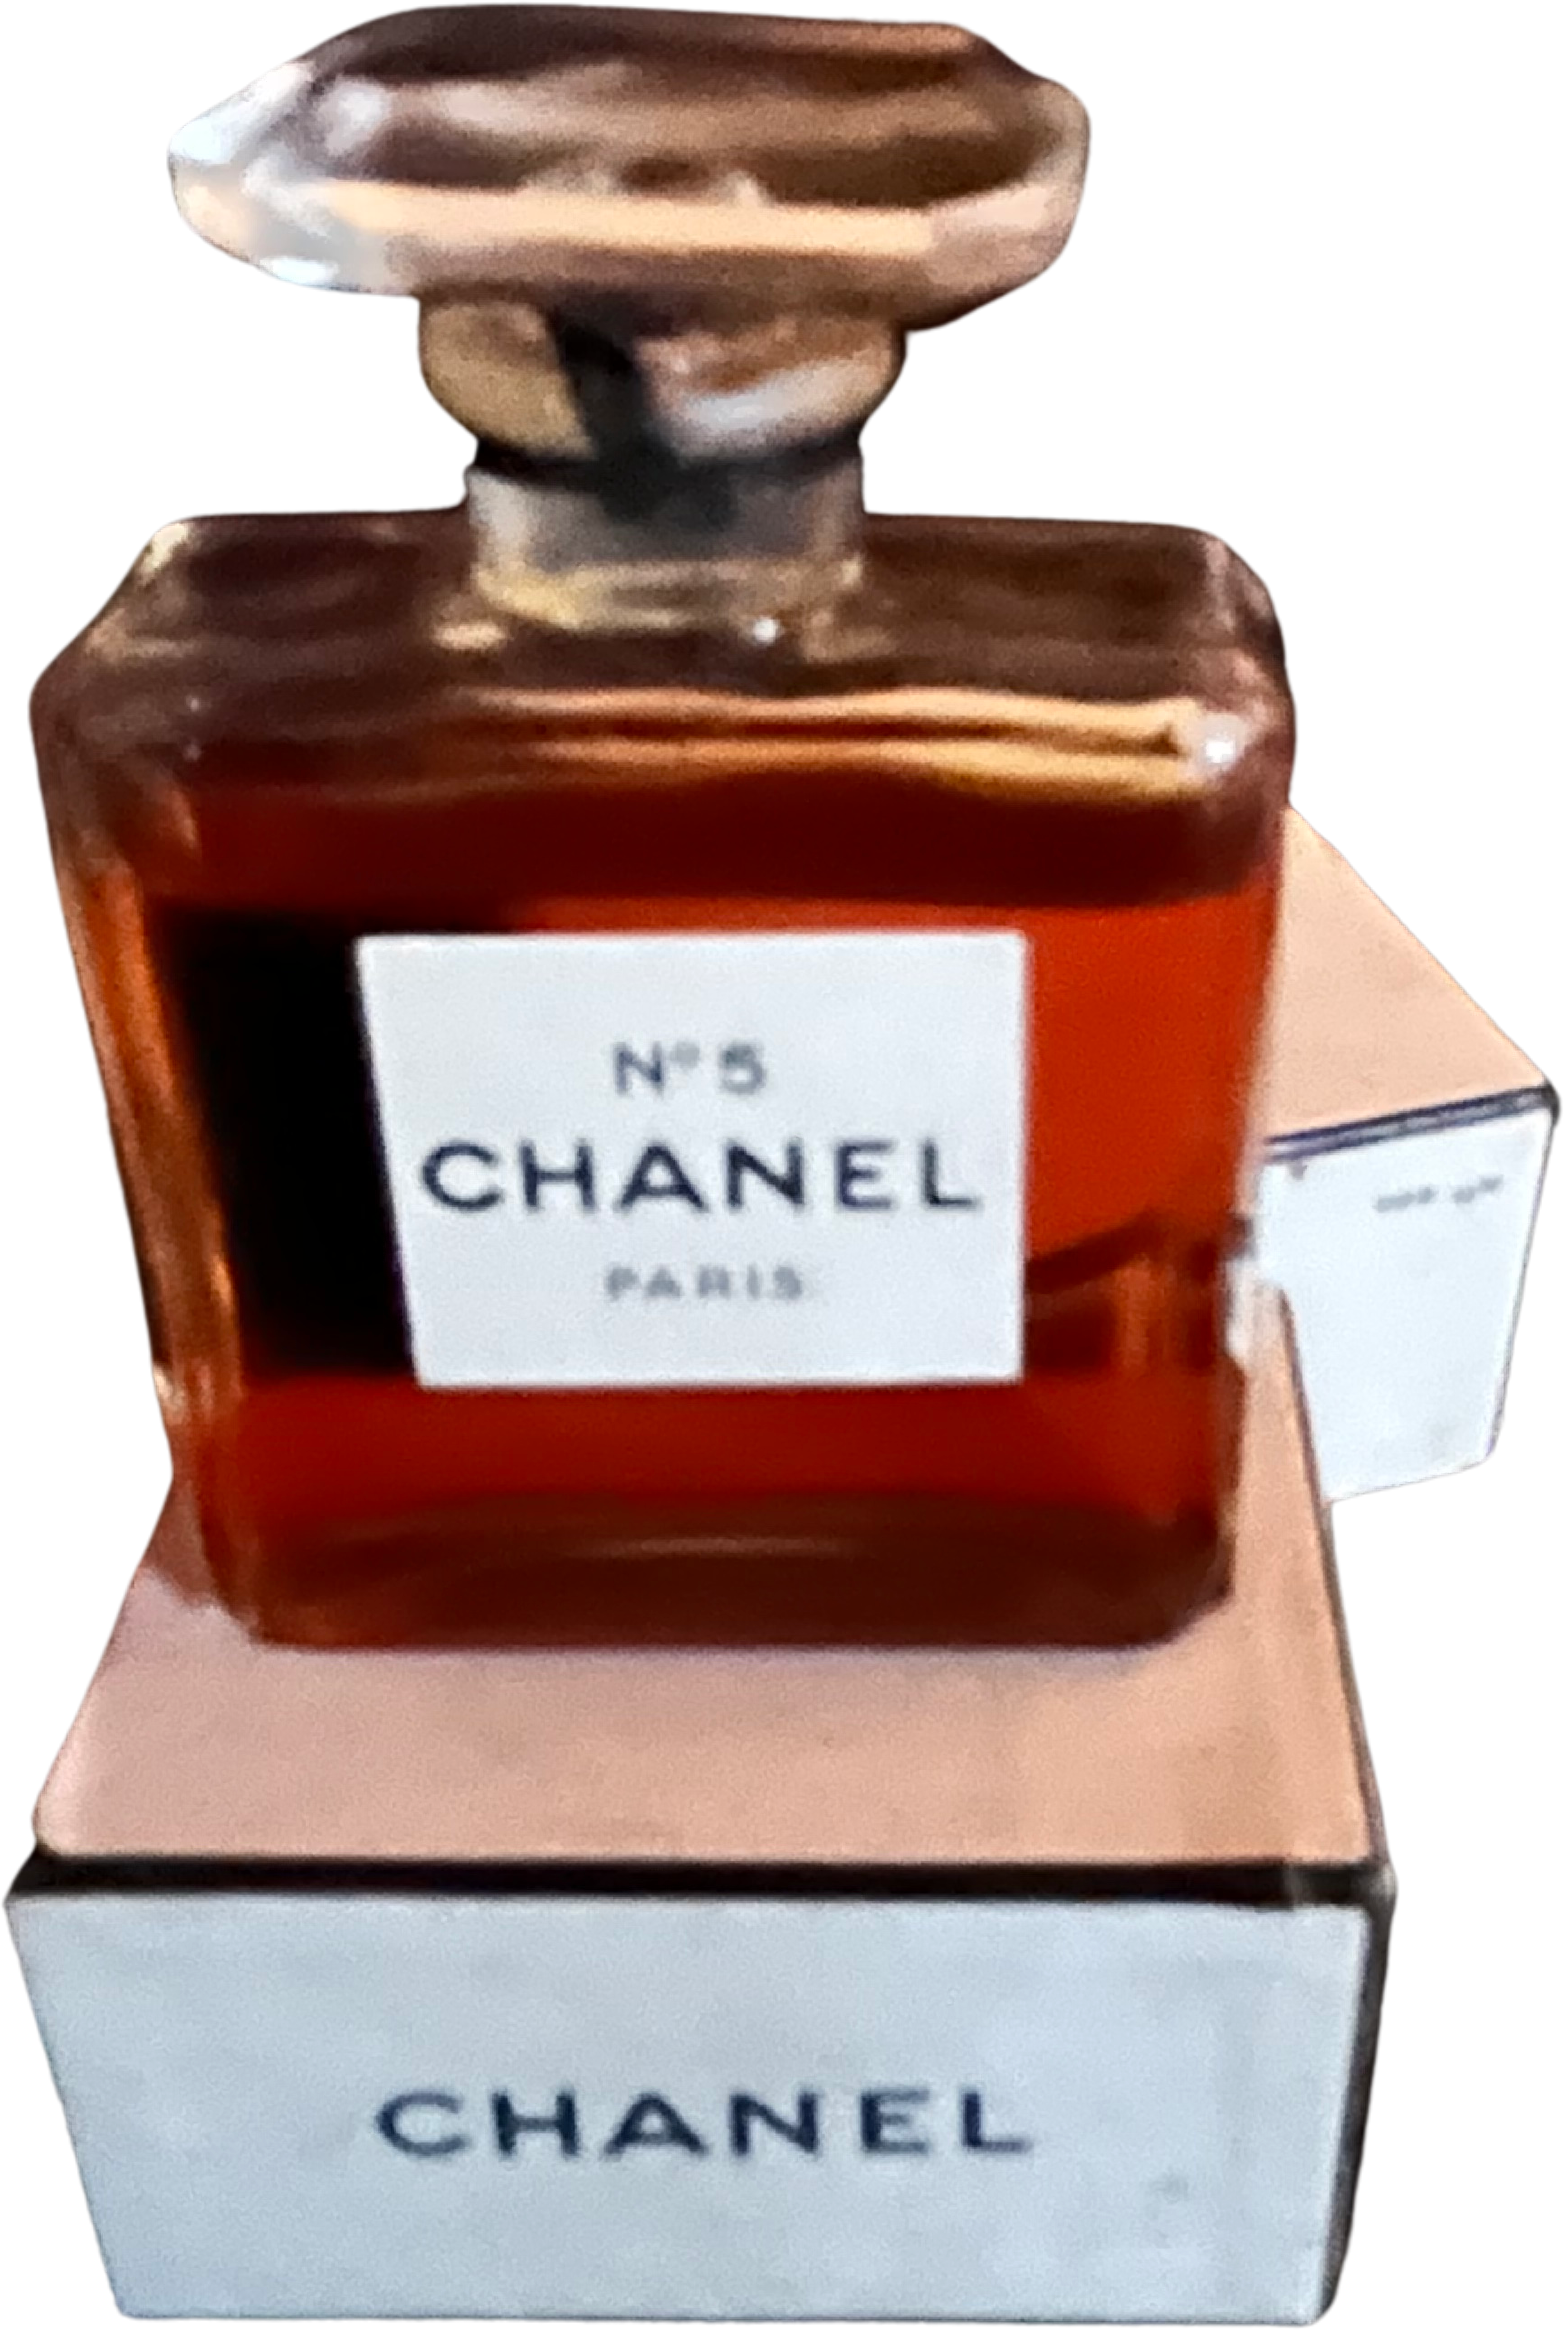 chanel number 5 box